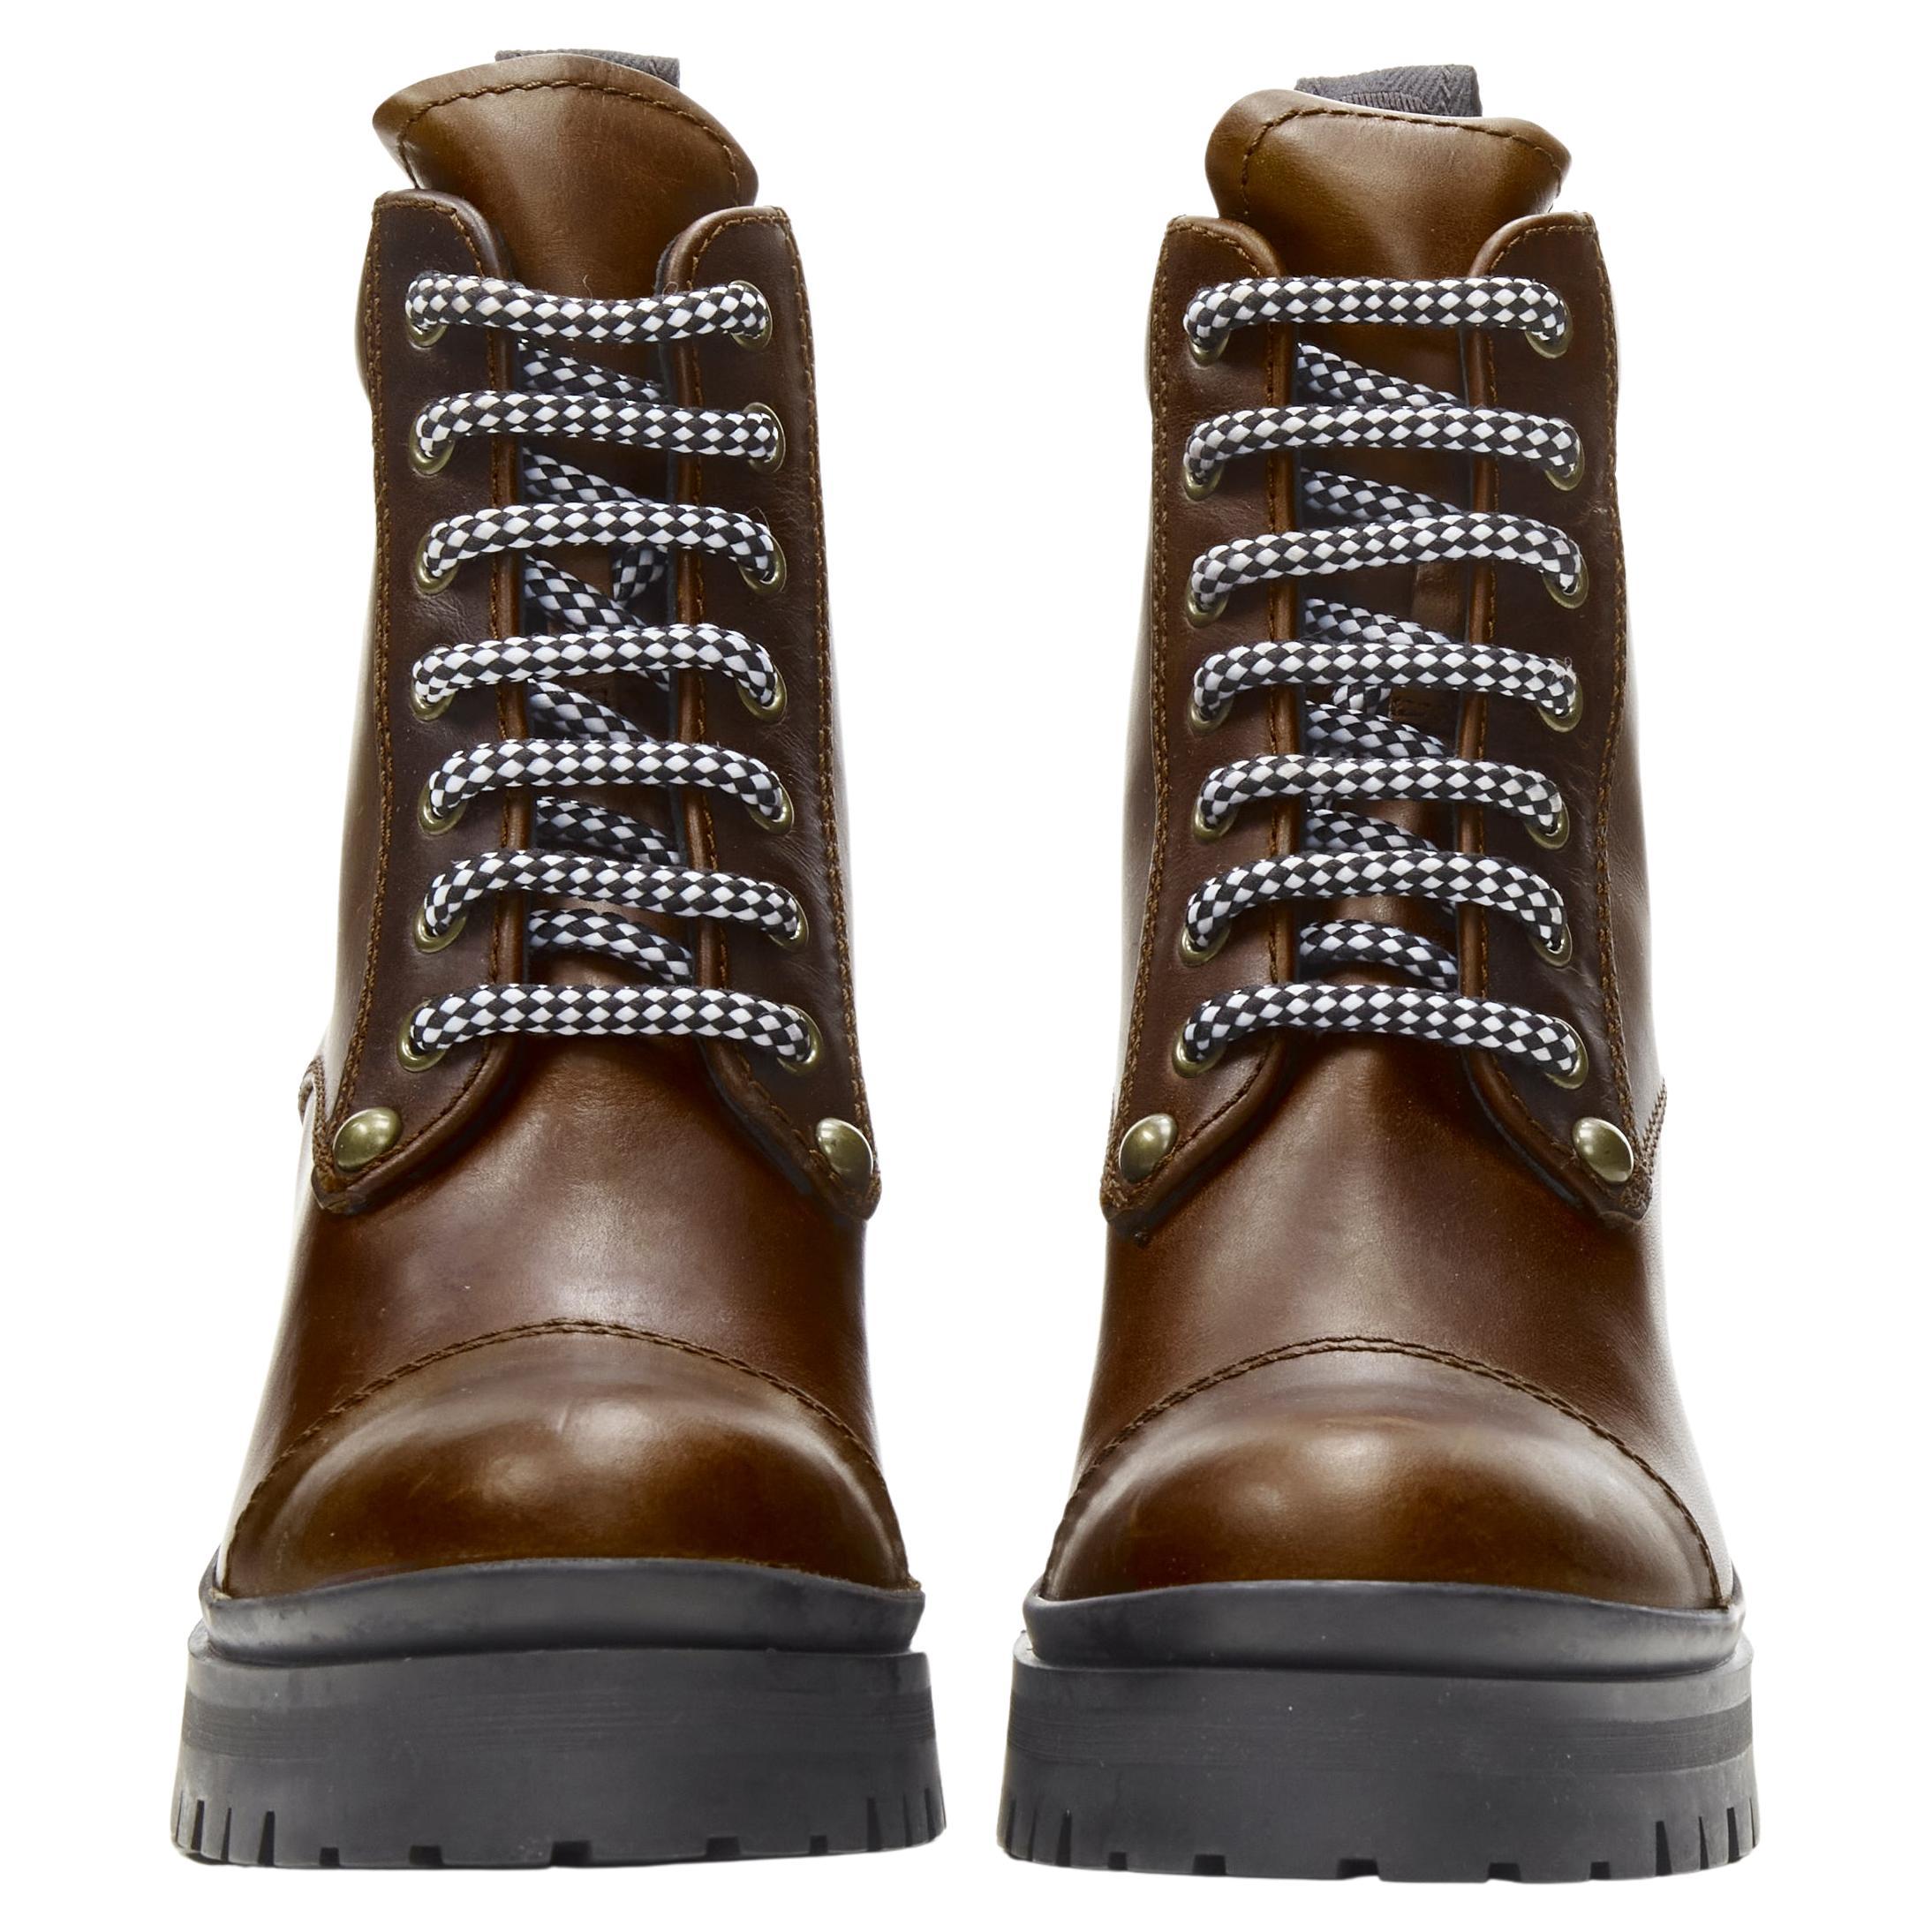 new MIU MIU 2019 Vintage brushed brown leather block heel Alpine boots EU36.5
Brand: Miu Miu
Designer: Miuccia Prada
Material: Leather
Color: Brown
Pattern: Solid
Closure: Lace Up
Extra Detail: Alpine boots. Brushed and scuffed cognac brown leather